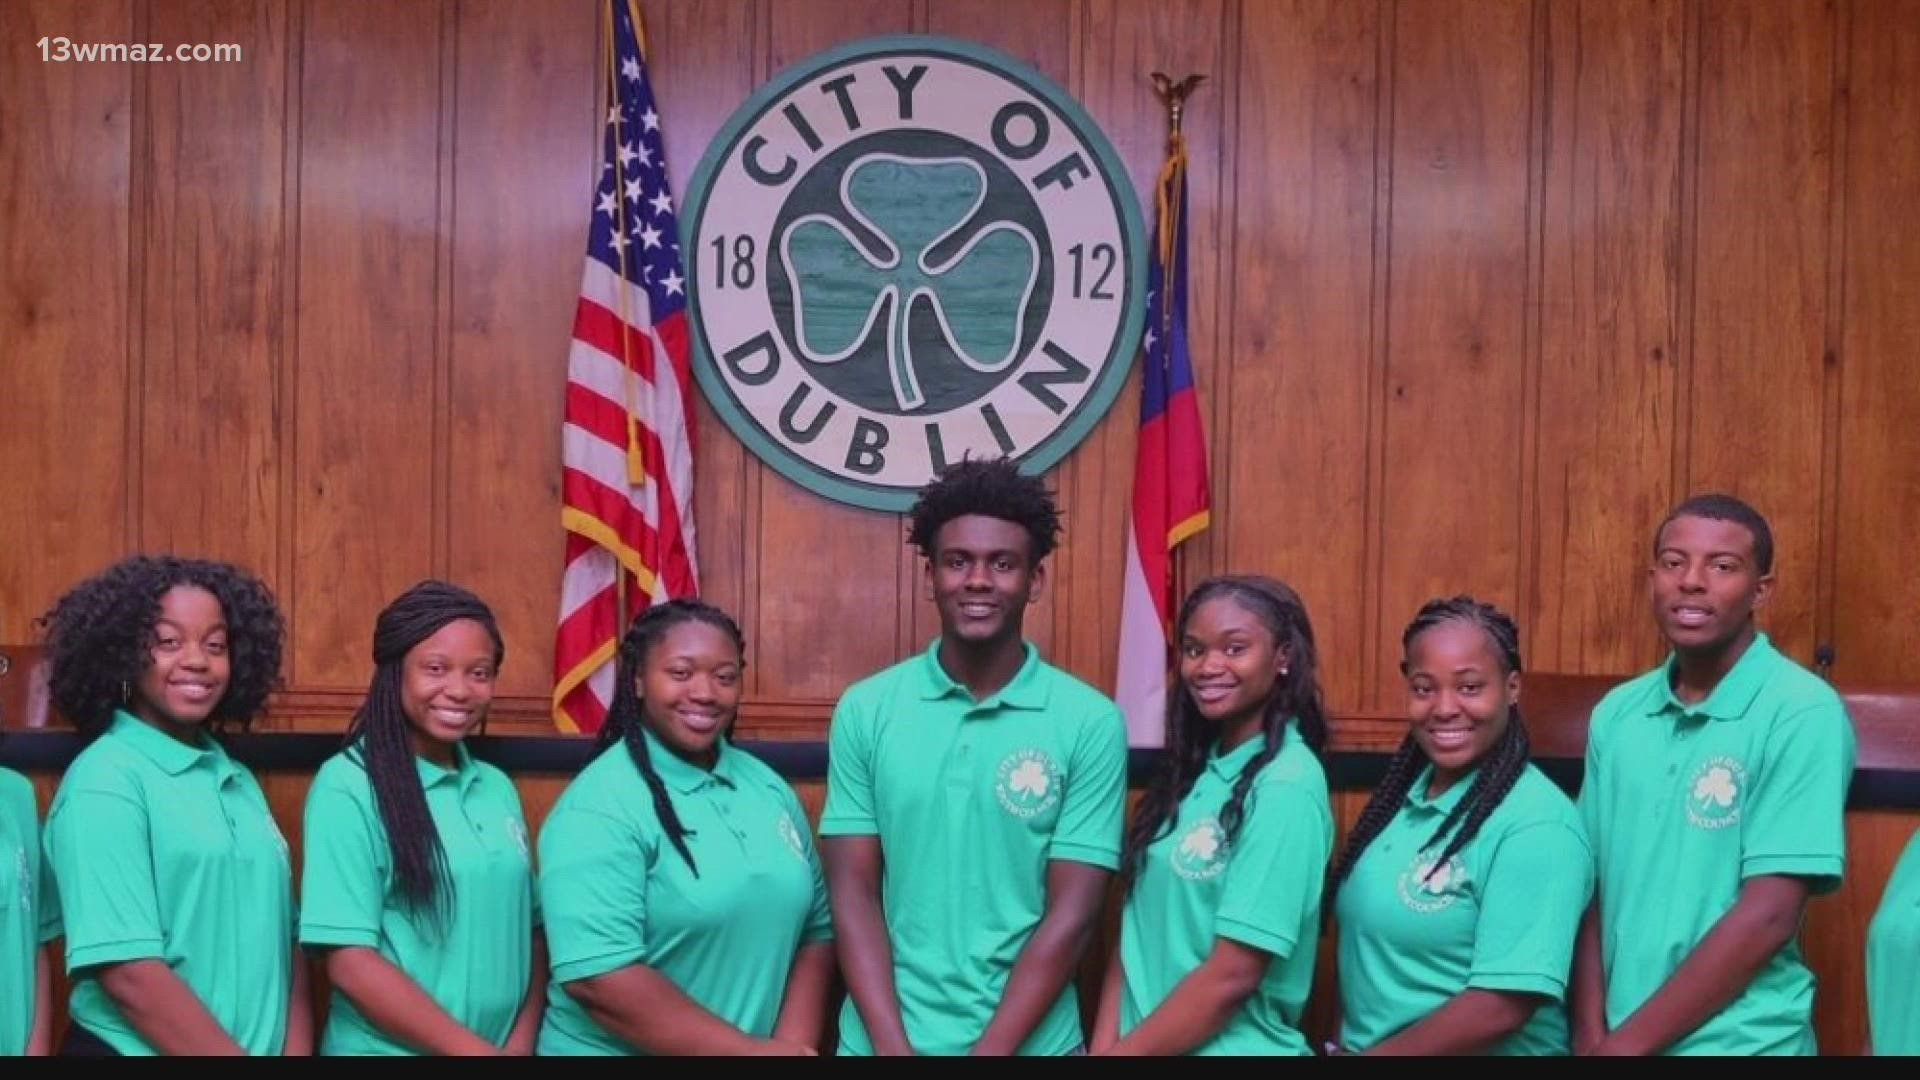 It's an opportunity for teens to get involved in local government and find solutions to community concerns.